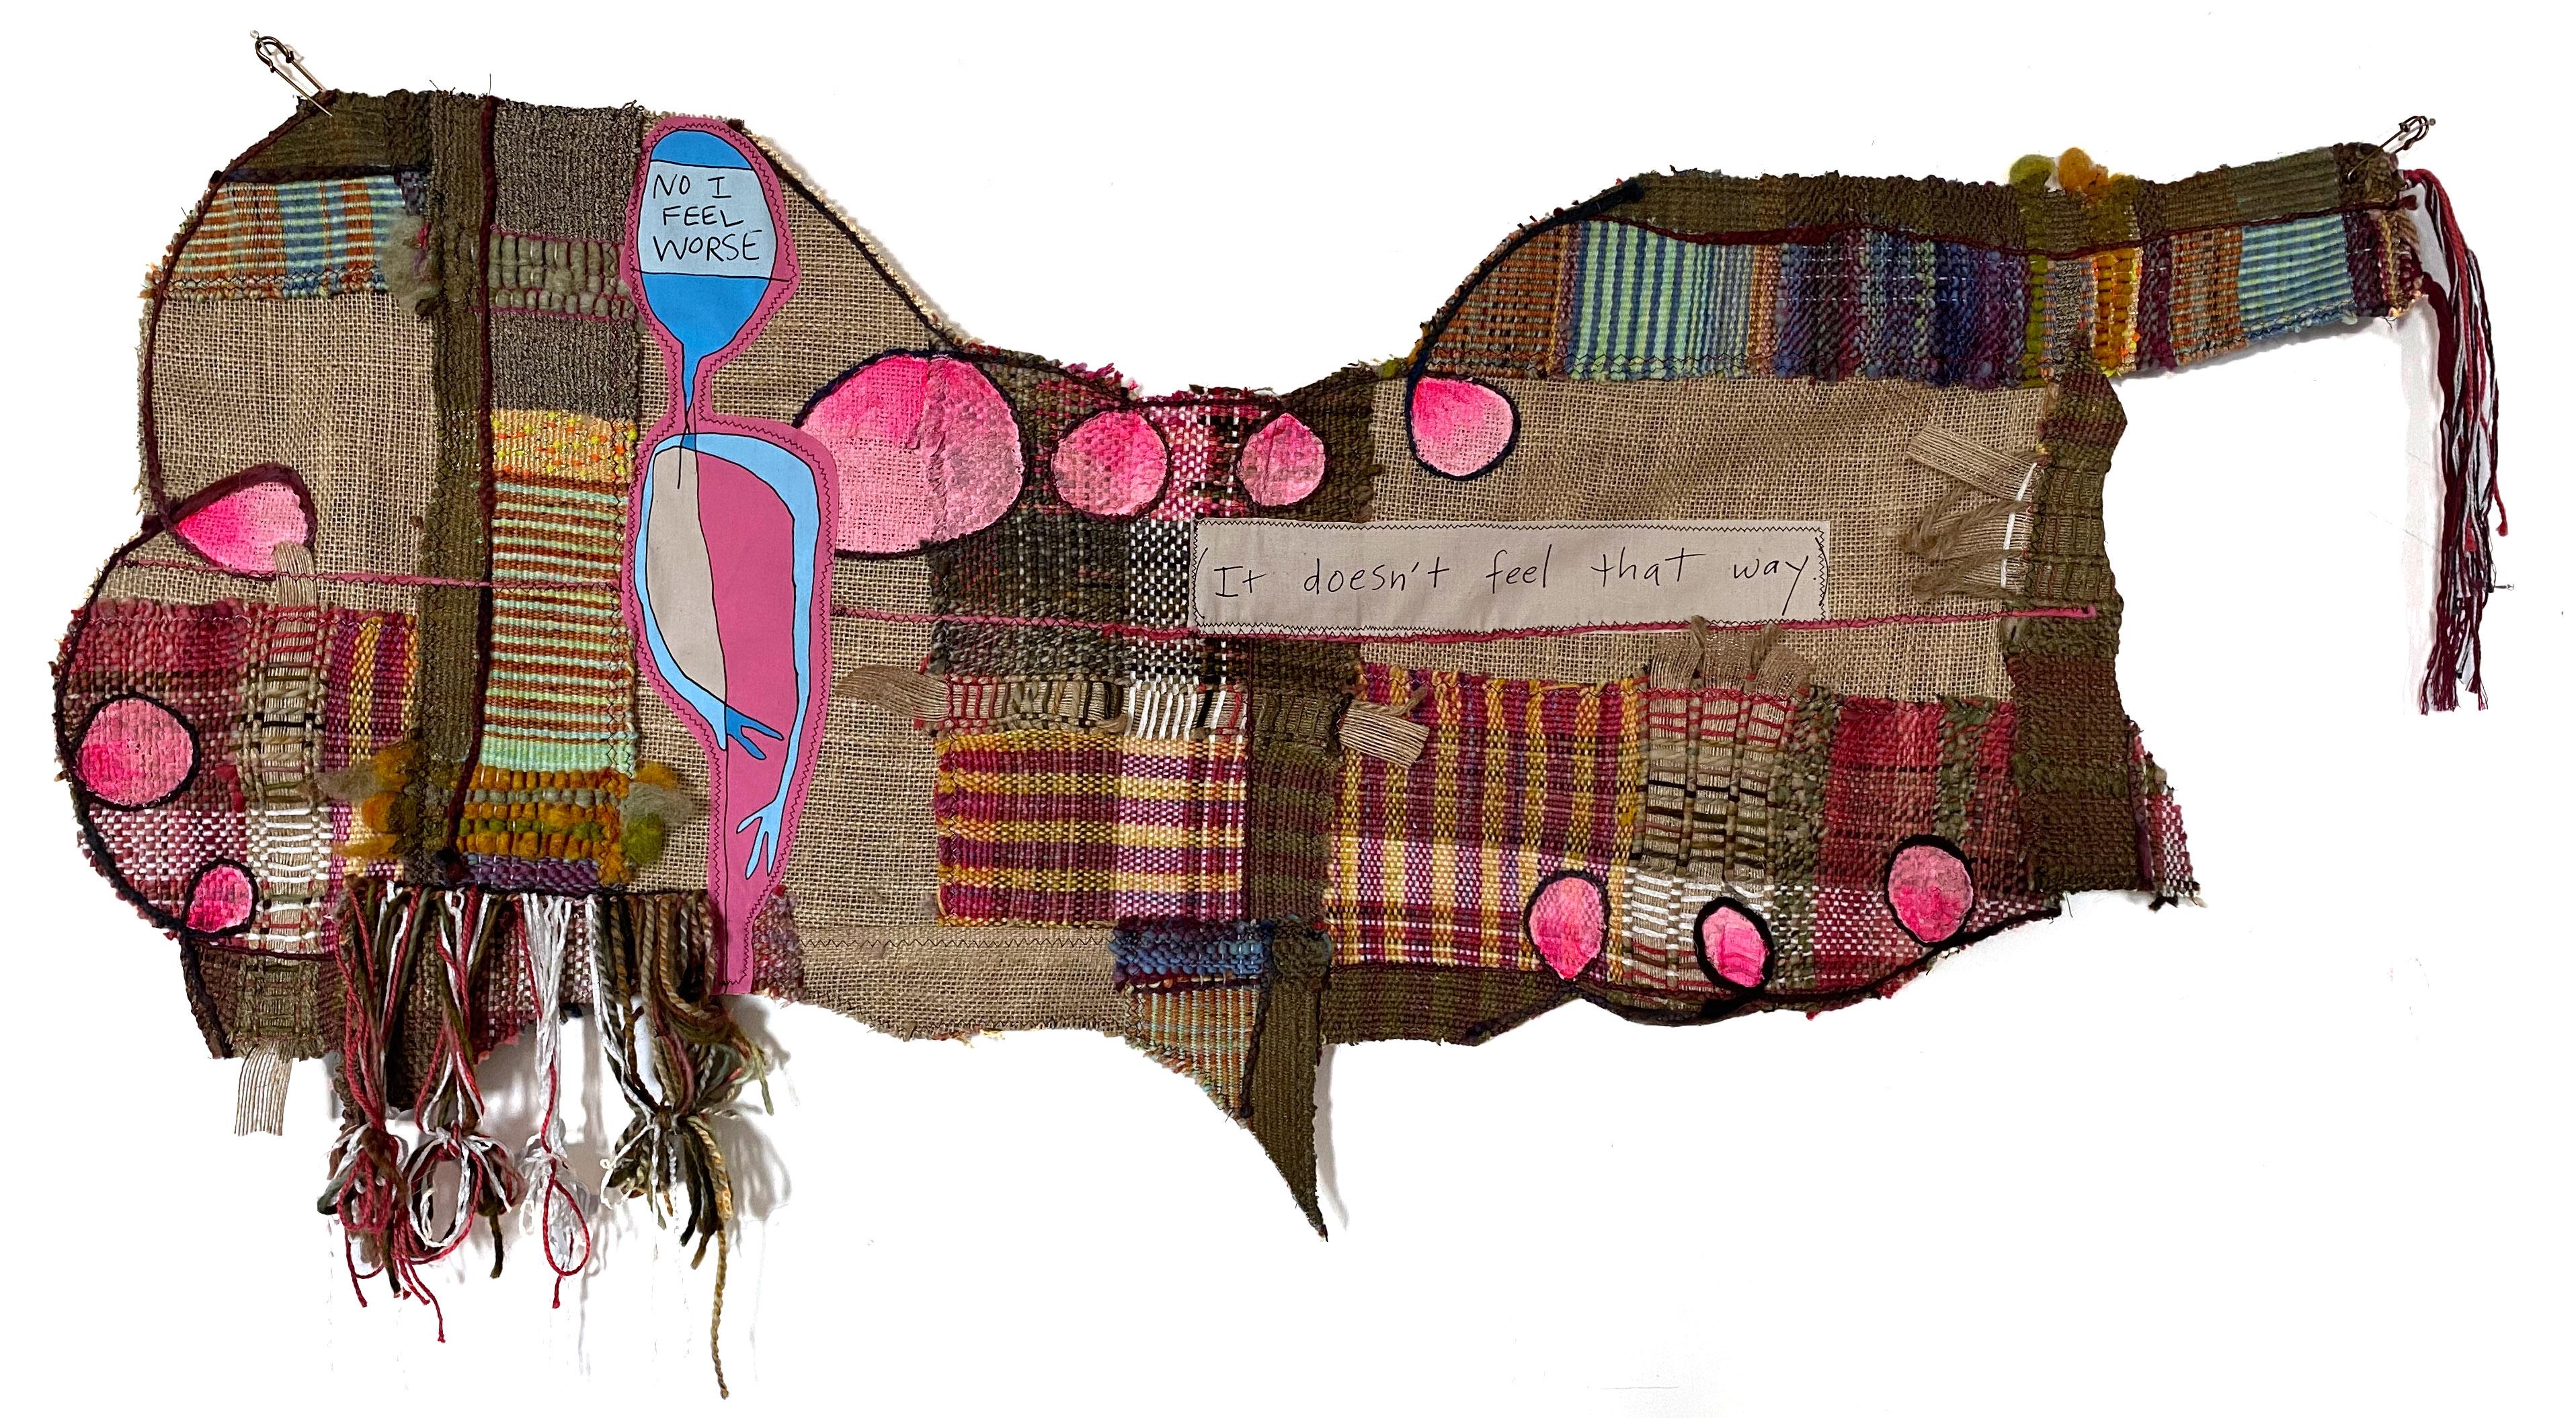 Handwoven textile wall hanging: 'No, I Feel Worse' - Mixed Media Art by Juliet Martin